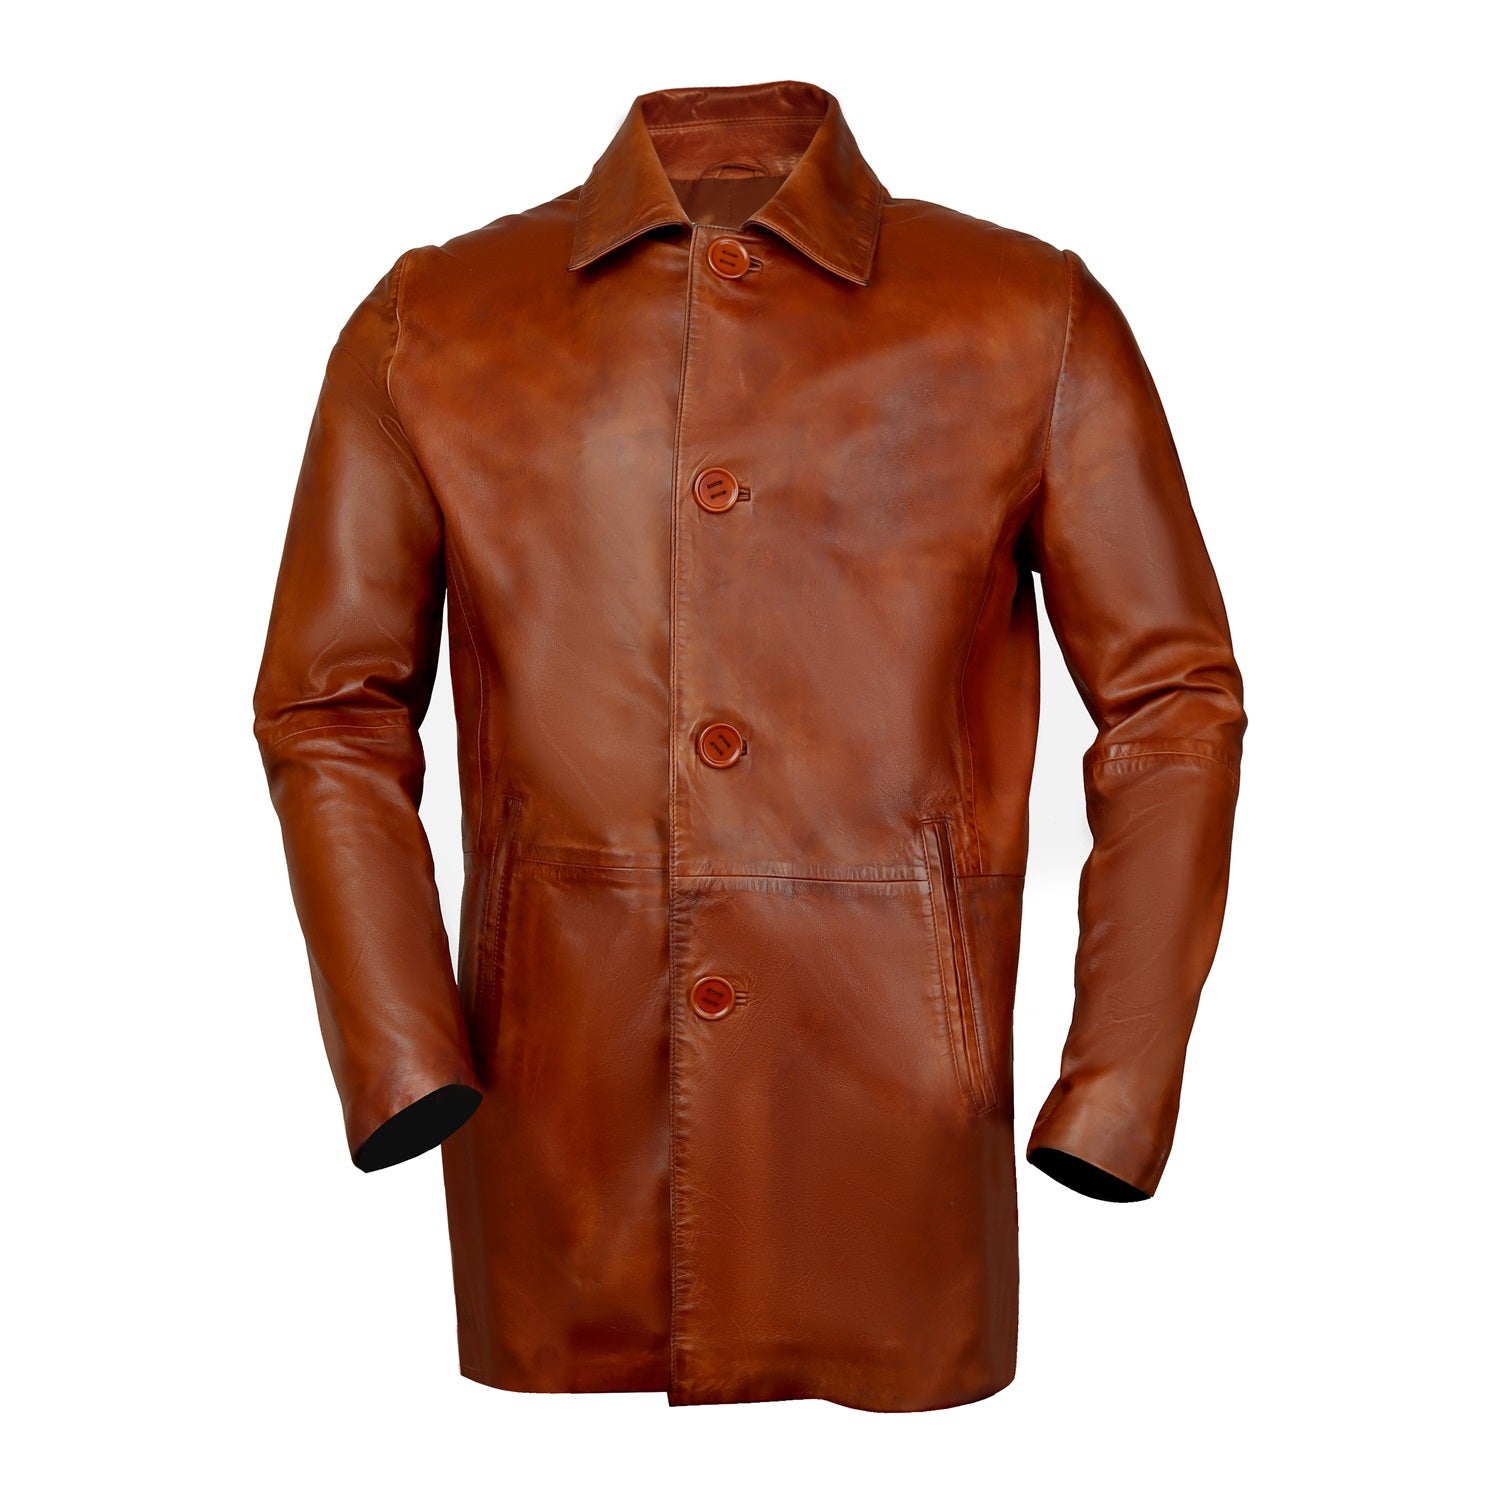 Long Shirt Style Collar Cognac Leather Jacket Coat With Button Closure By Brune & Bareskin